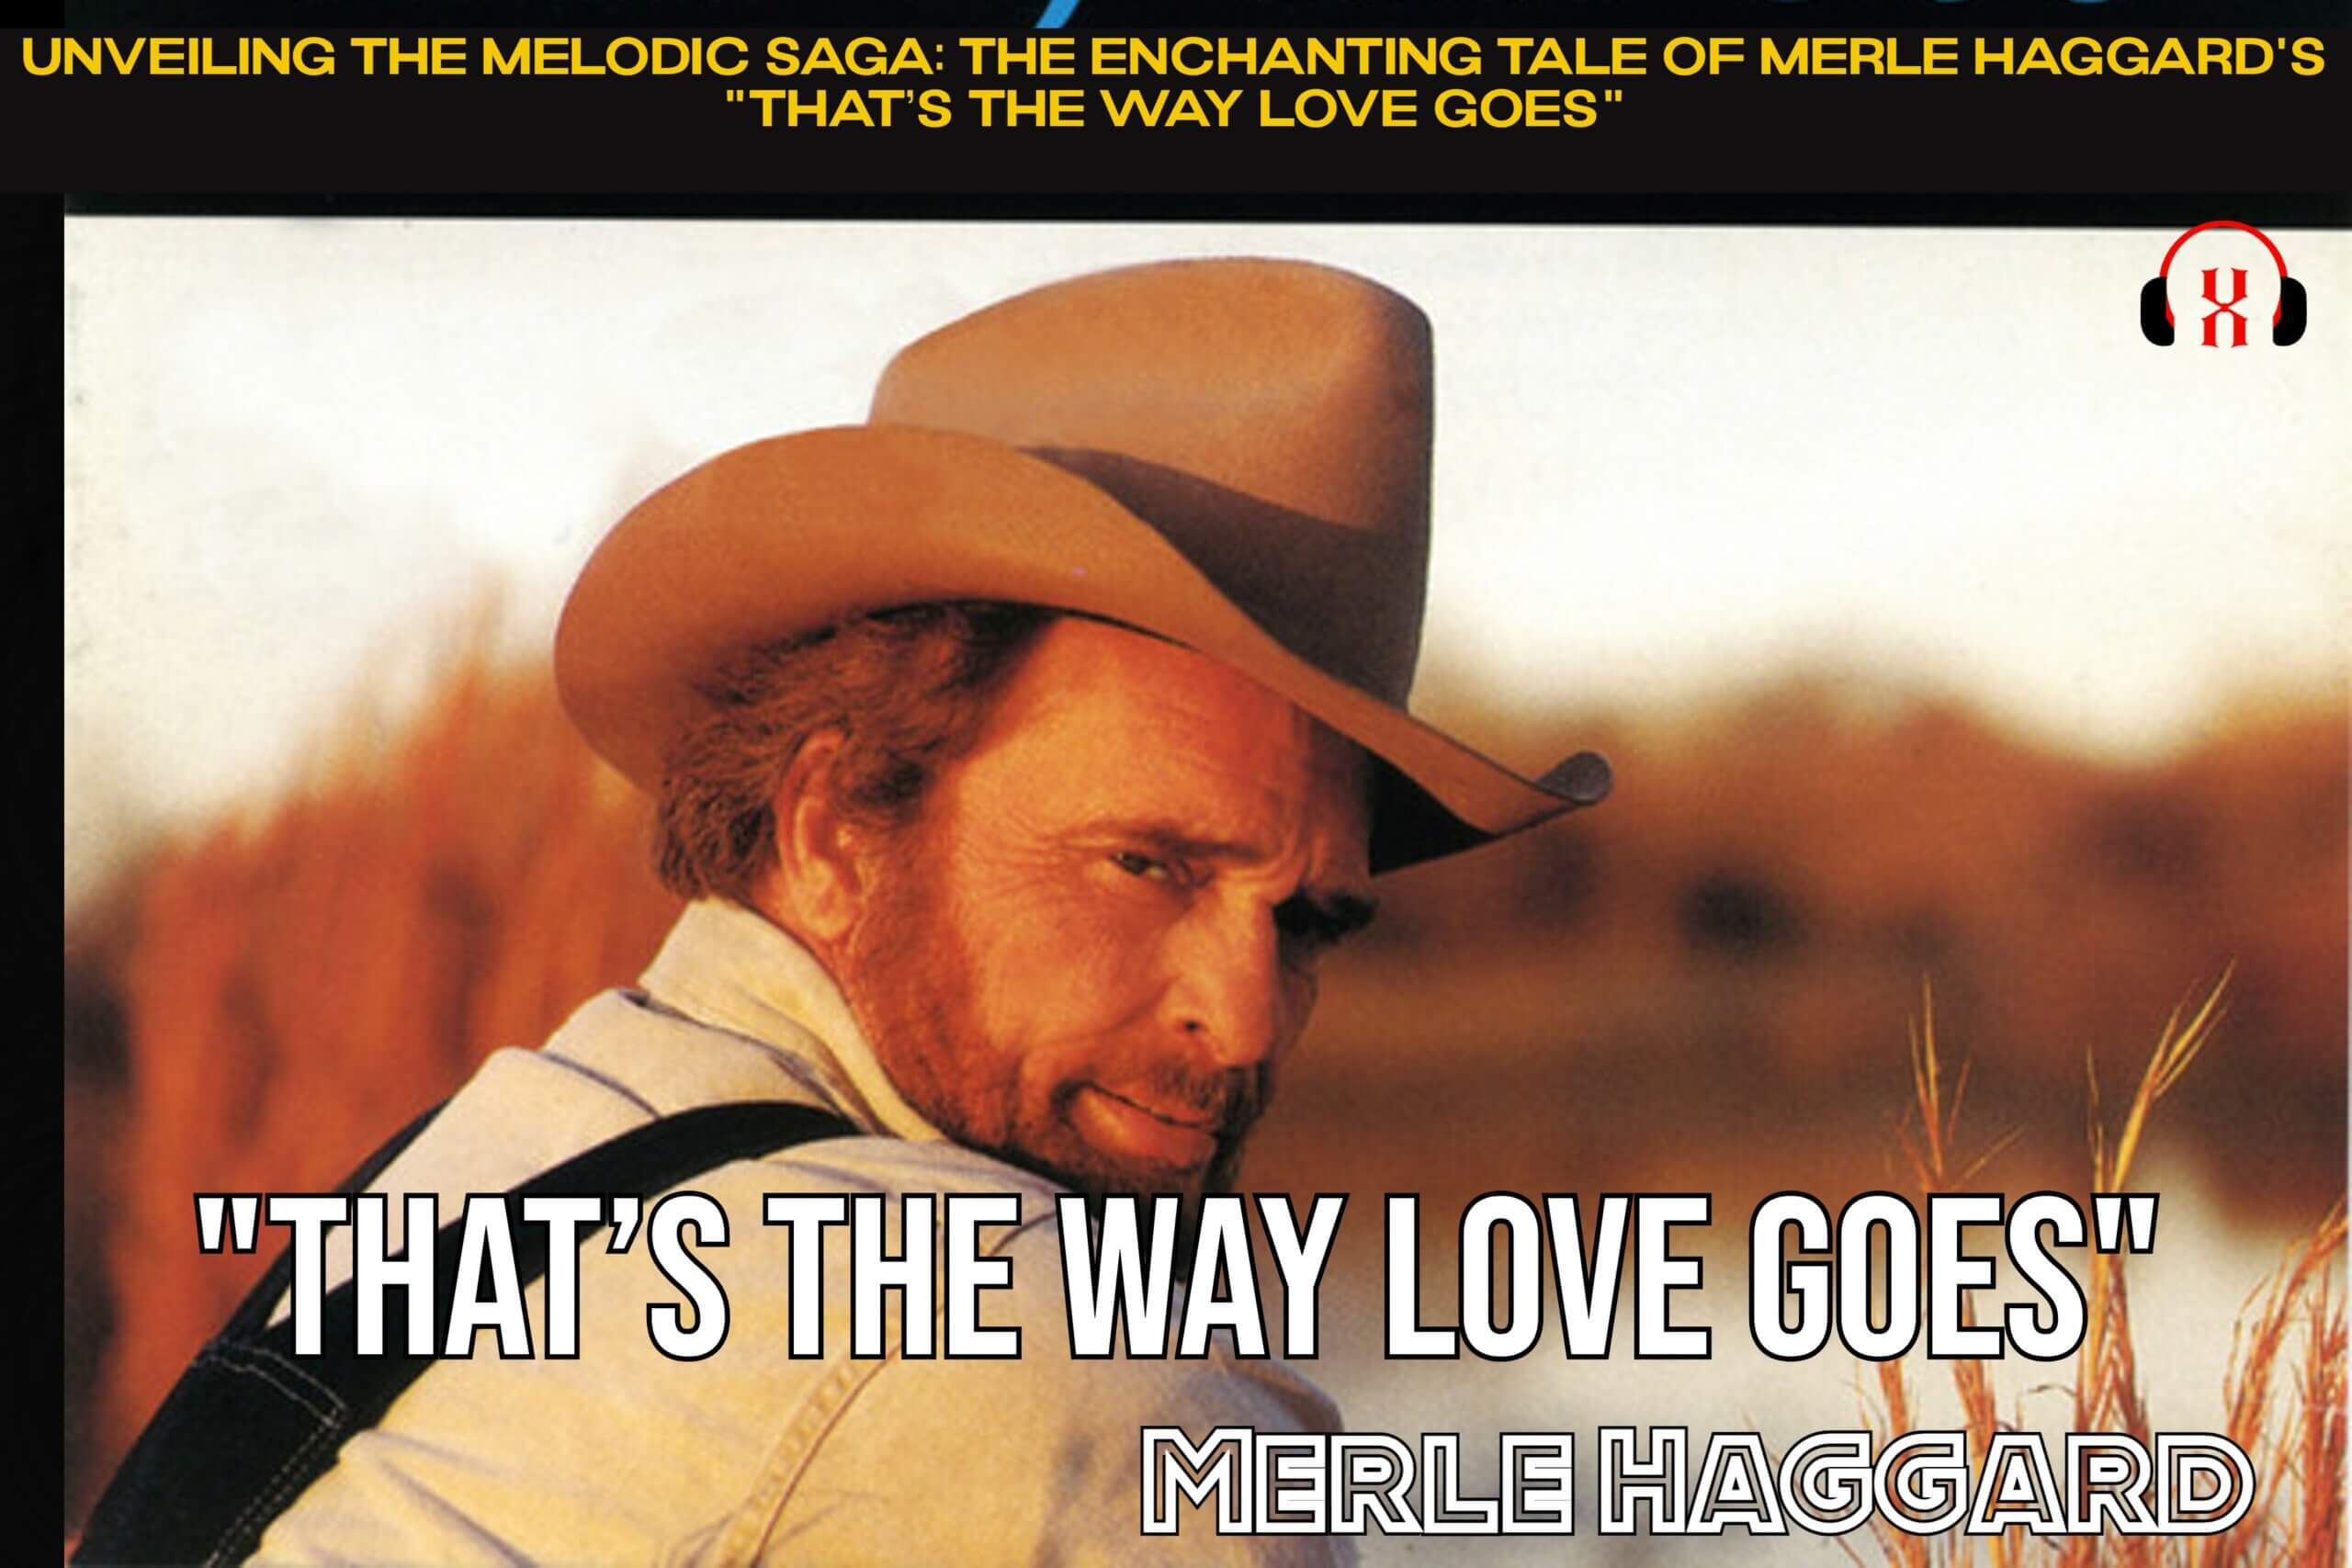 Unveiling the Melodic Saga: The Enchanting Tale of Merle Haggard’s “That’s the Way Love Goes”